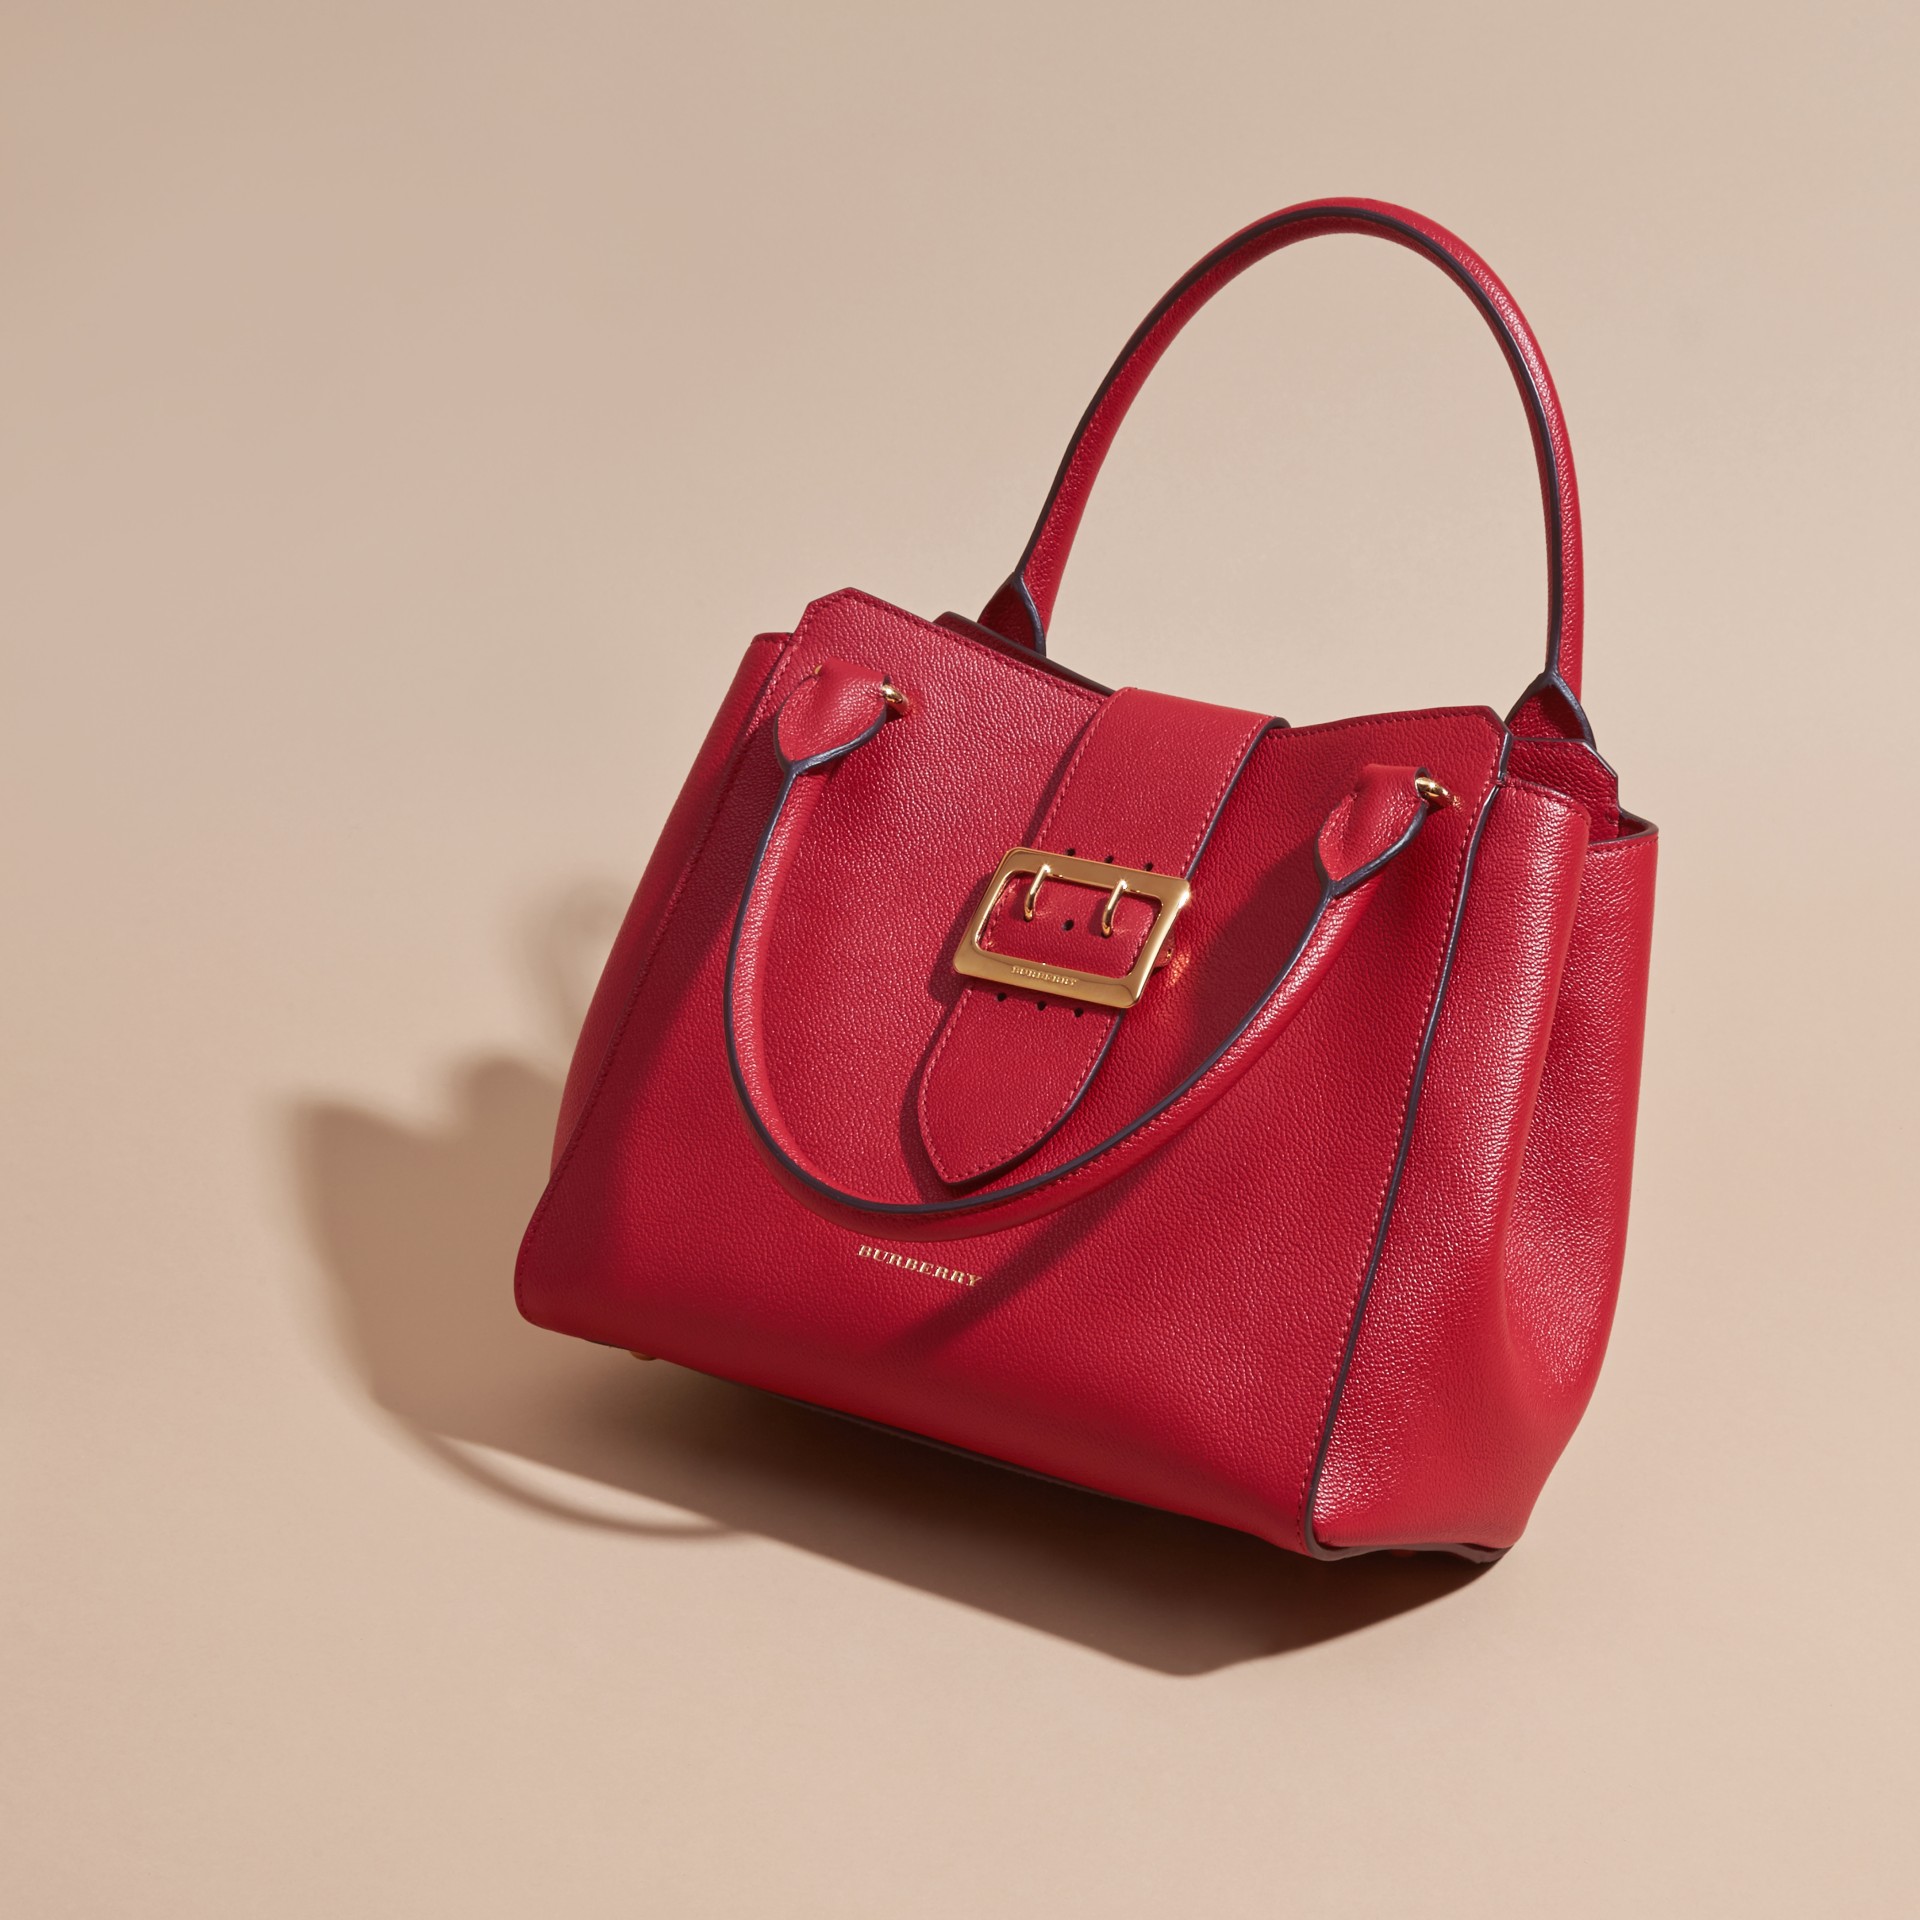 The Medium Buckle Tote in Grainy Leather in Parade Red | Burberry